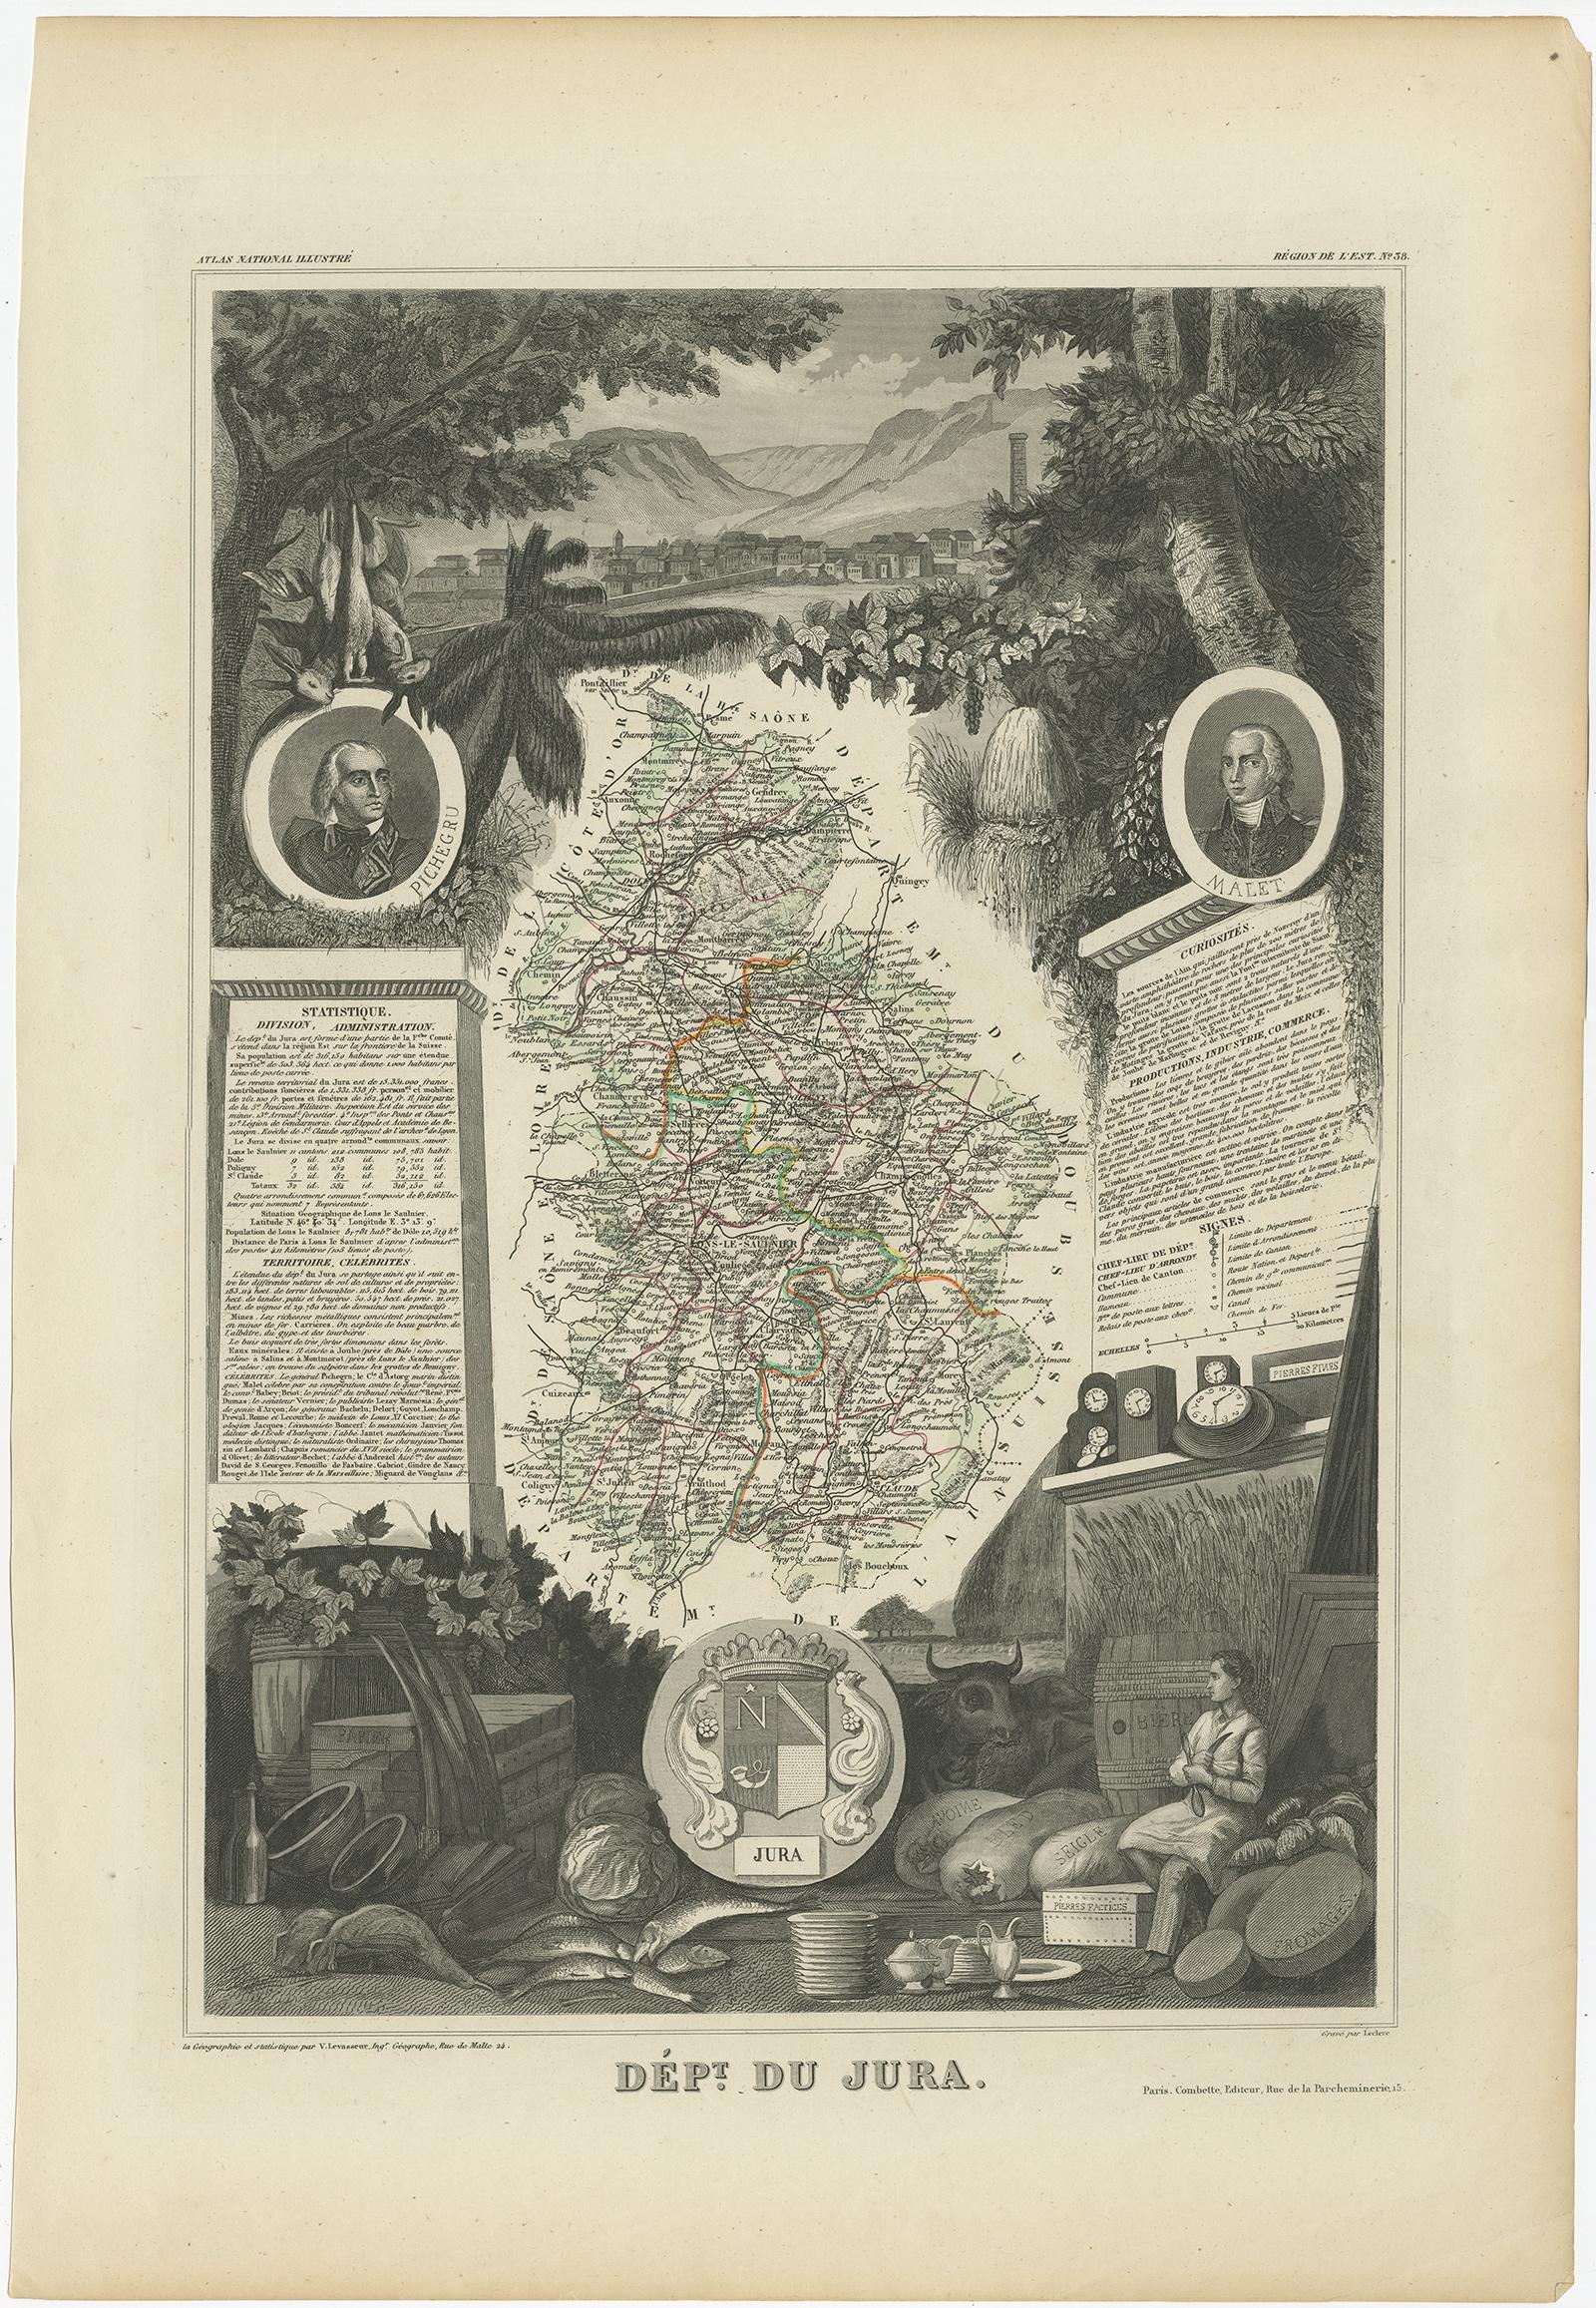 Antique map titled 'Dépt. du Jura'. Map of the French department Jura, France. 

Jura is a department in the Bourgogne-Franche-Comté region in Eastern France. Named after the Jura Mountains, its prefecture is Lons-le-Saunier. Its subprefectures are